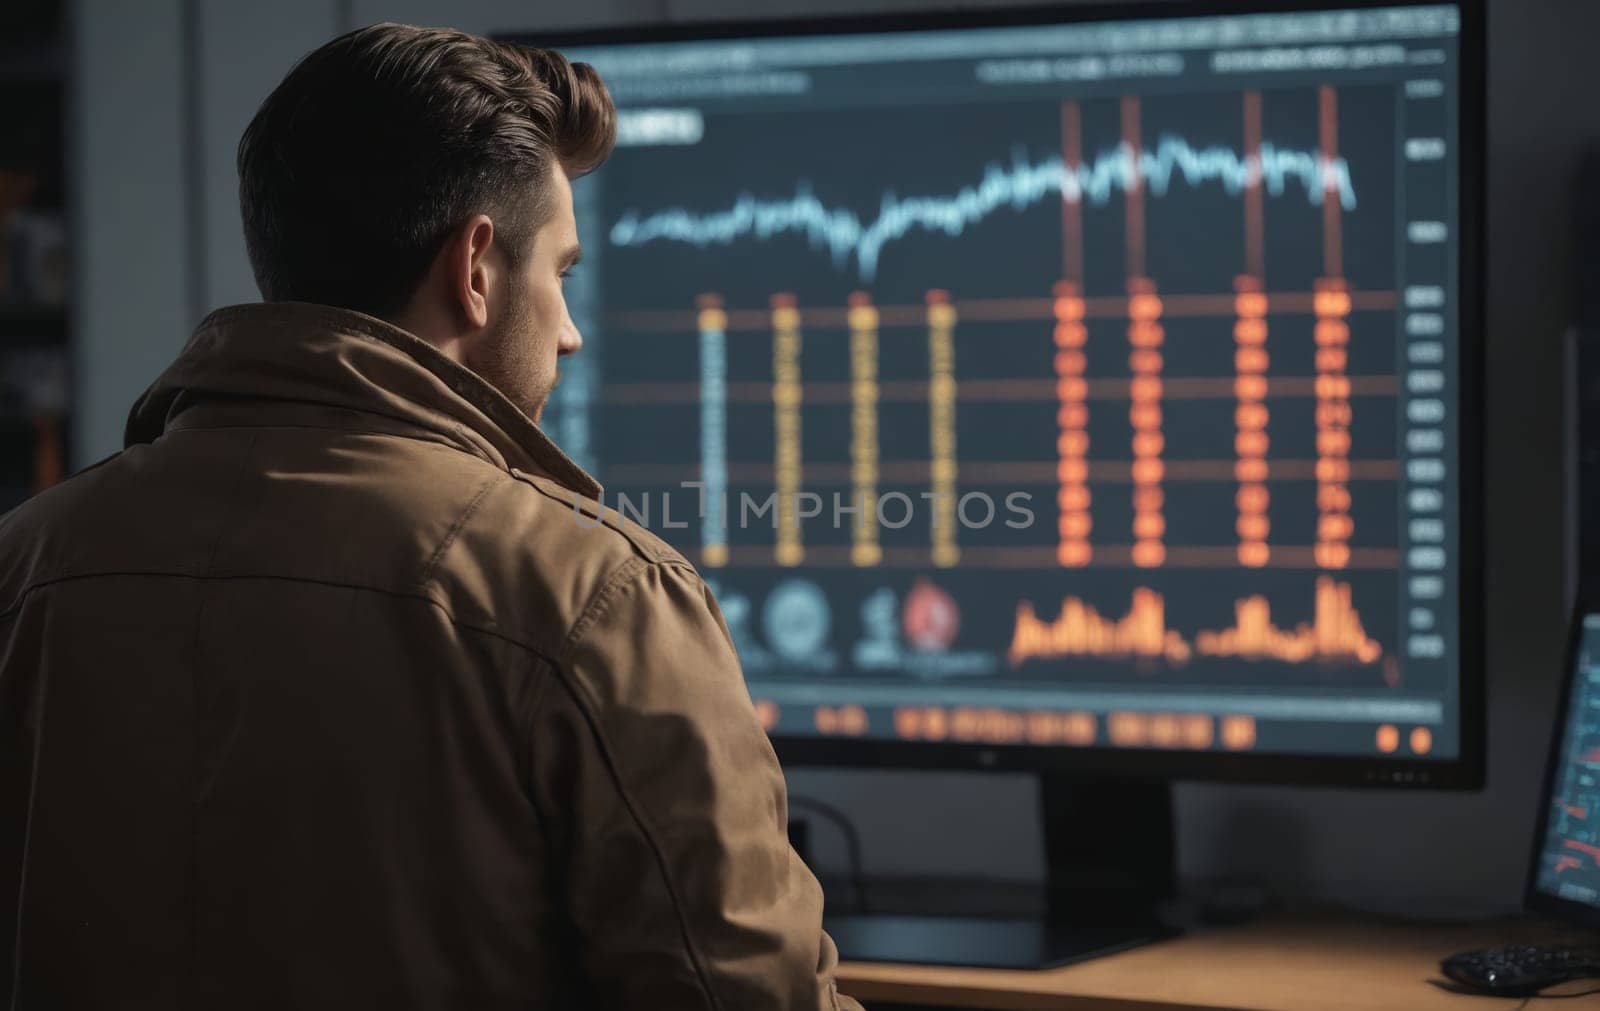 Side view of a young man in a jacket looking at the monitor with stock market data